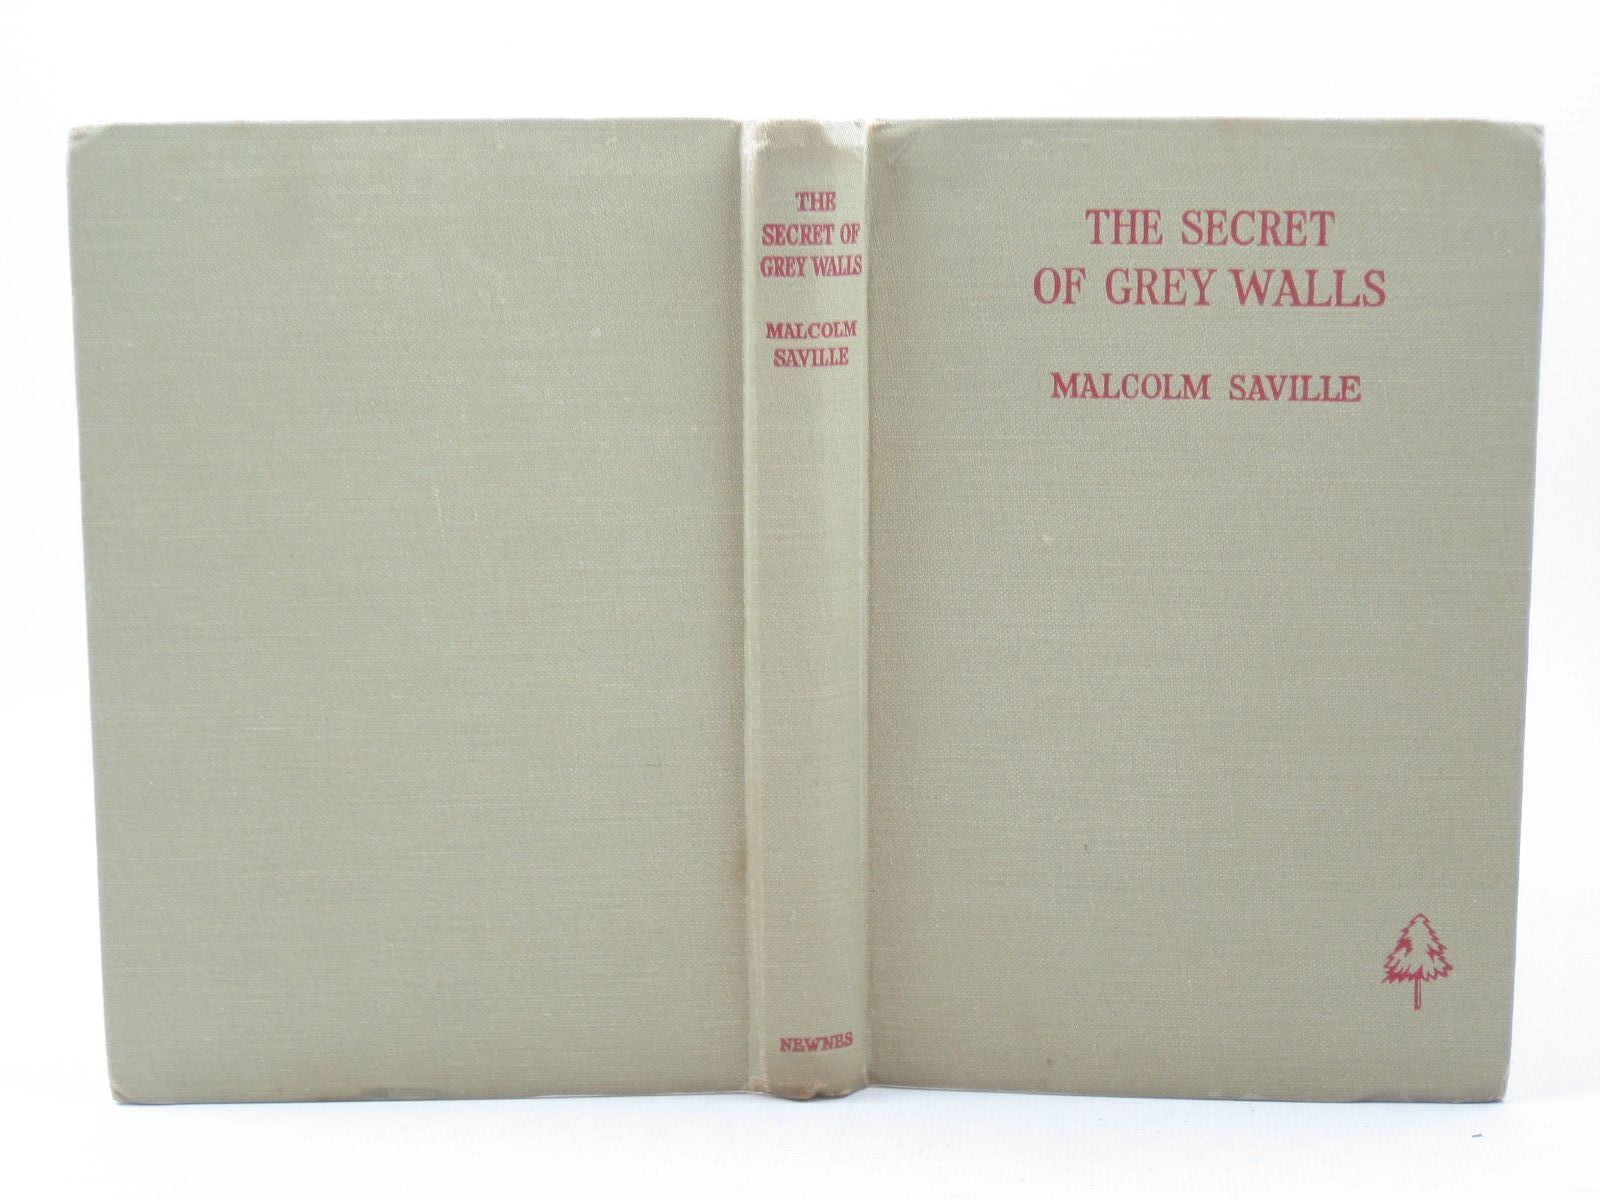 Photo of THE SECRET OF GREY WALLS written by Saville, Malcolm illustrated by Prance, Bertram published by George Newnes Ltd. (STOCK CODE: 1402637)  for sale by Stella & Rose's Books